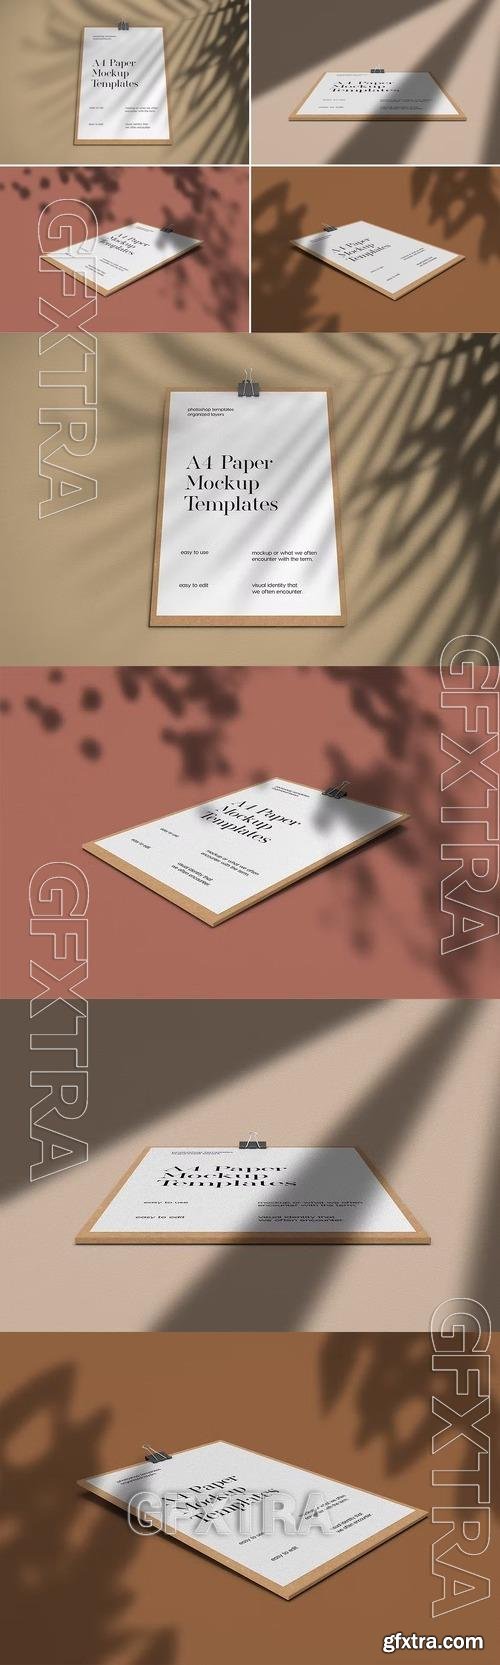 A4 Paper with Clipboard Mockup HDRX468